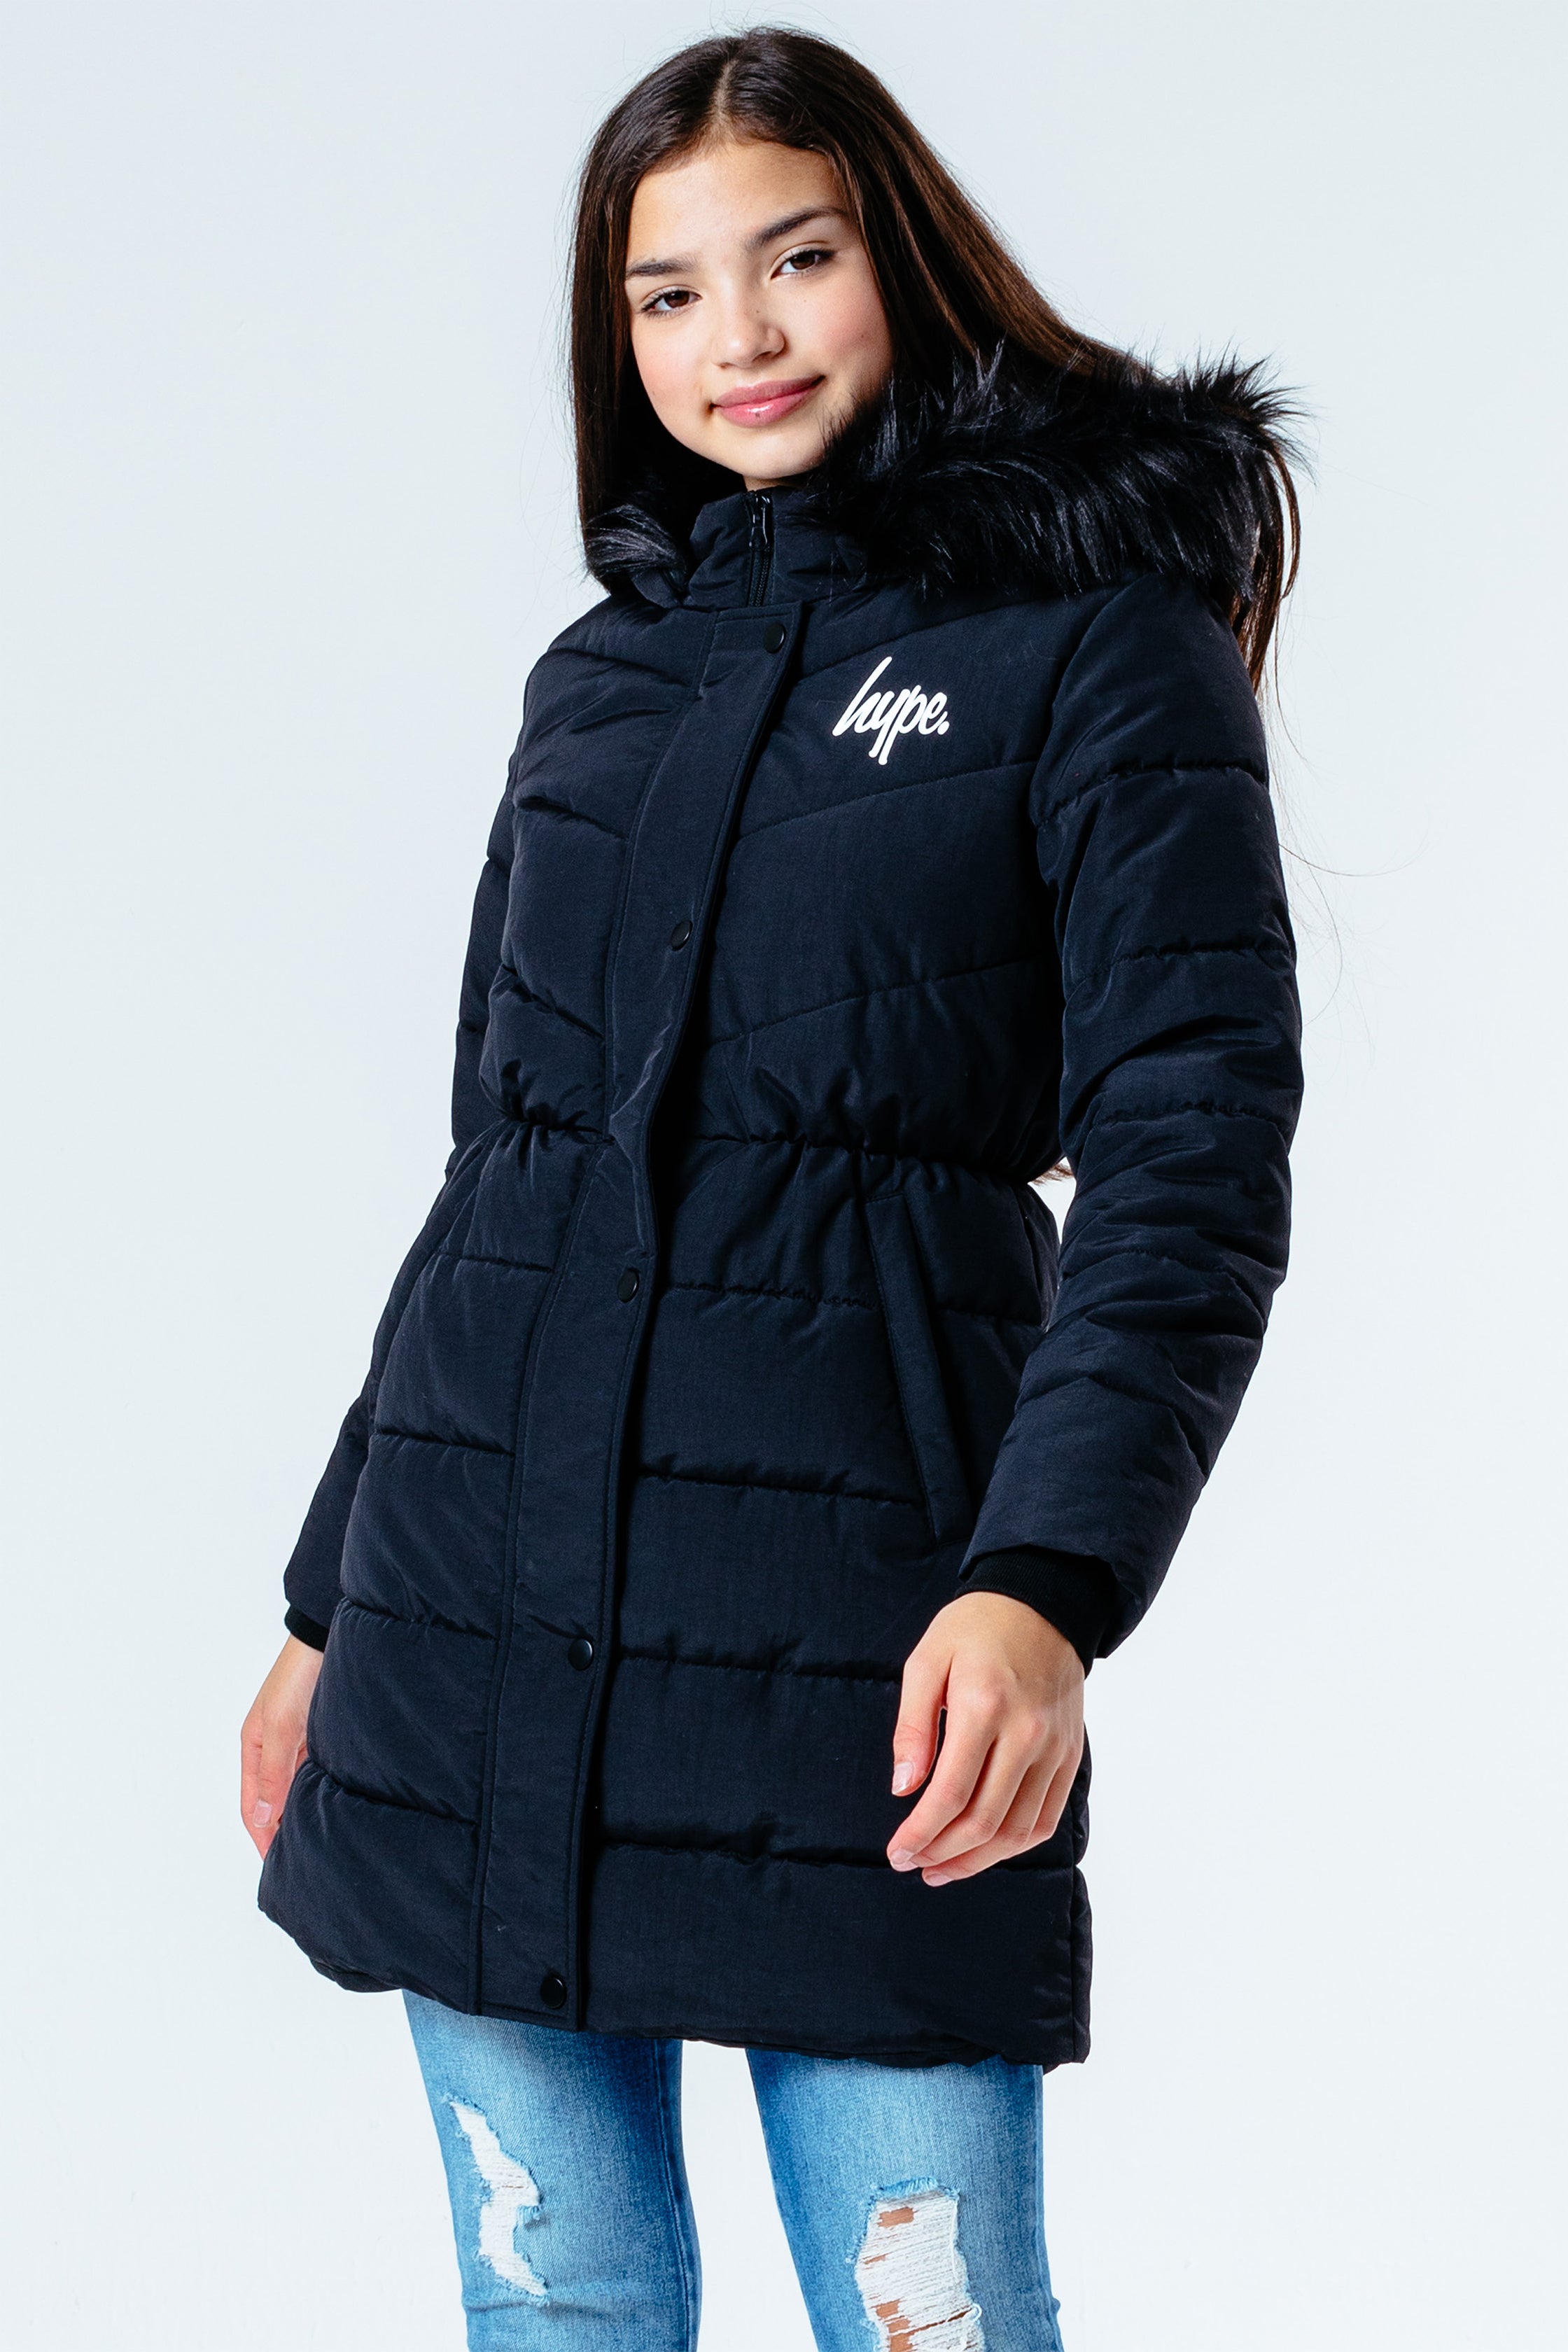 HYPE BLACK FITTED PARKA GIRLS JACKET | Hype.